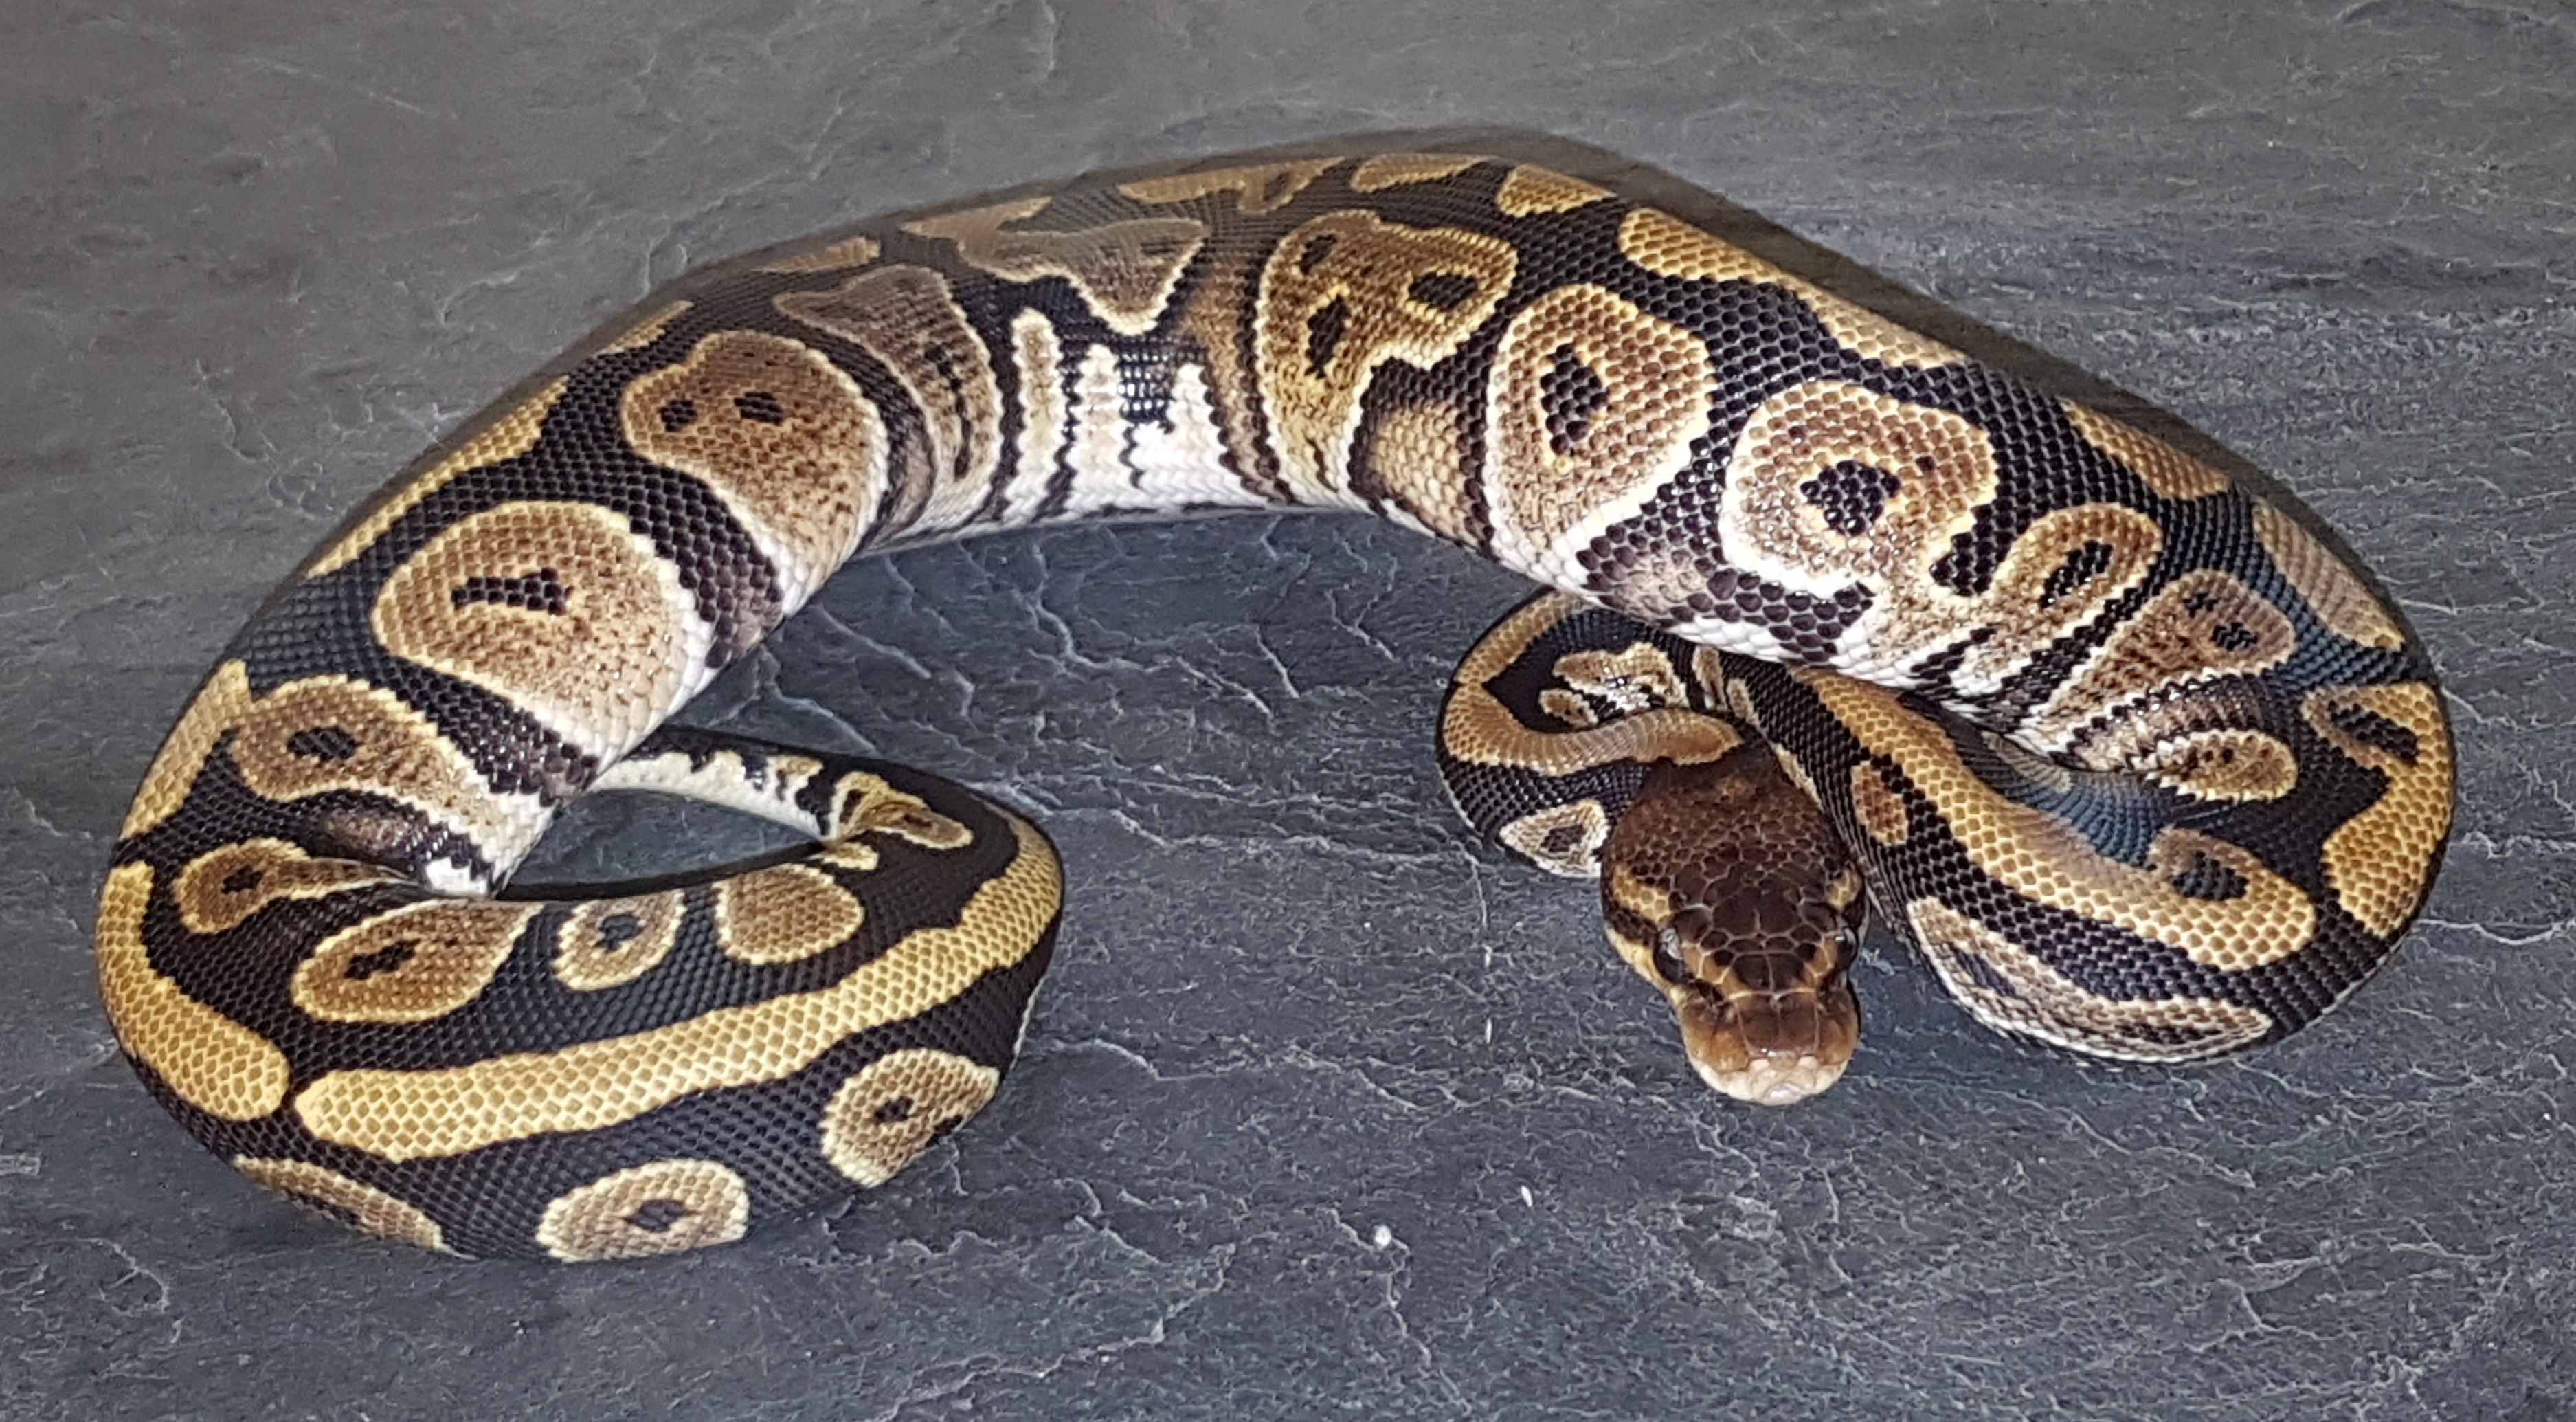 Copper Ball Python by AKW23-Reptiles